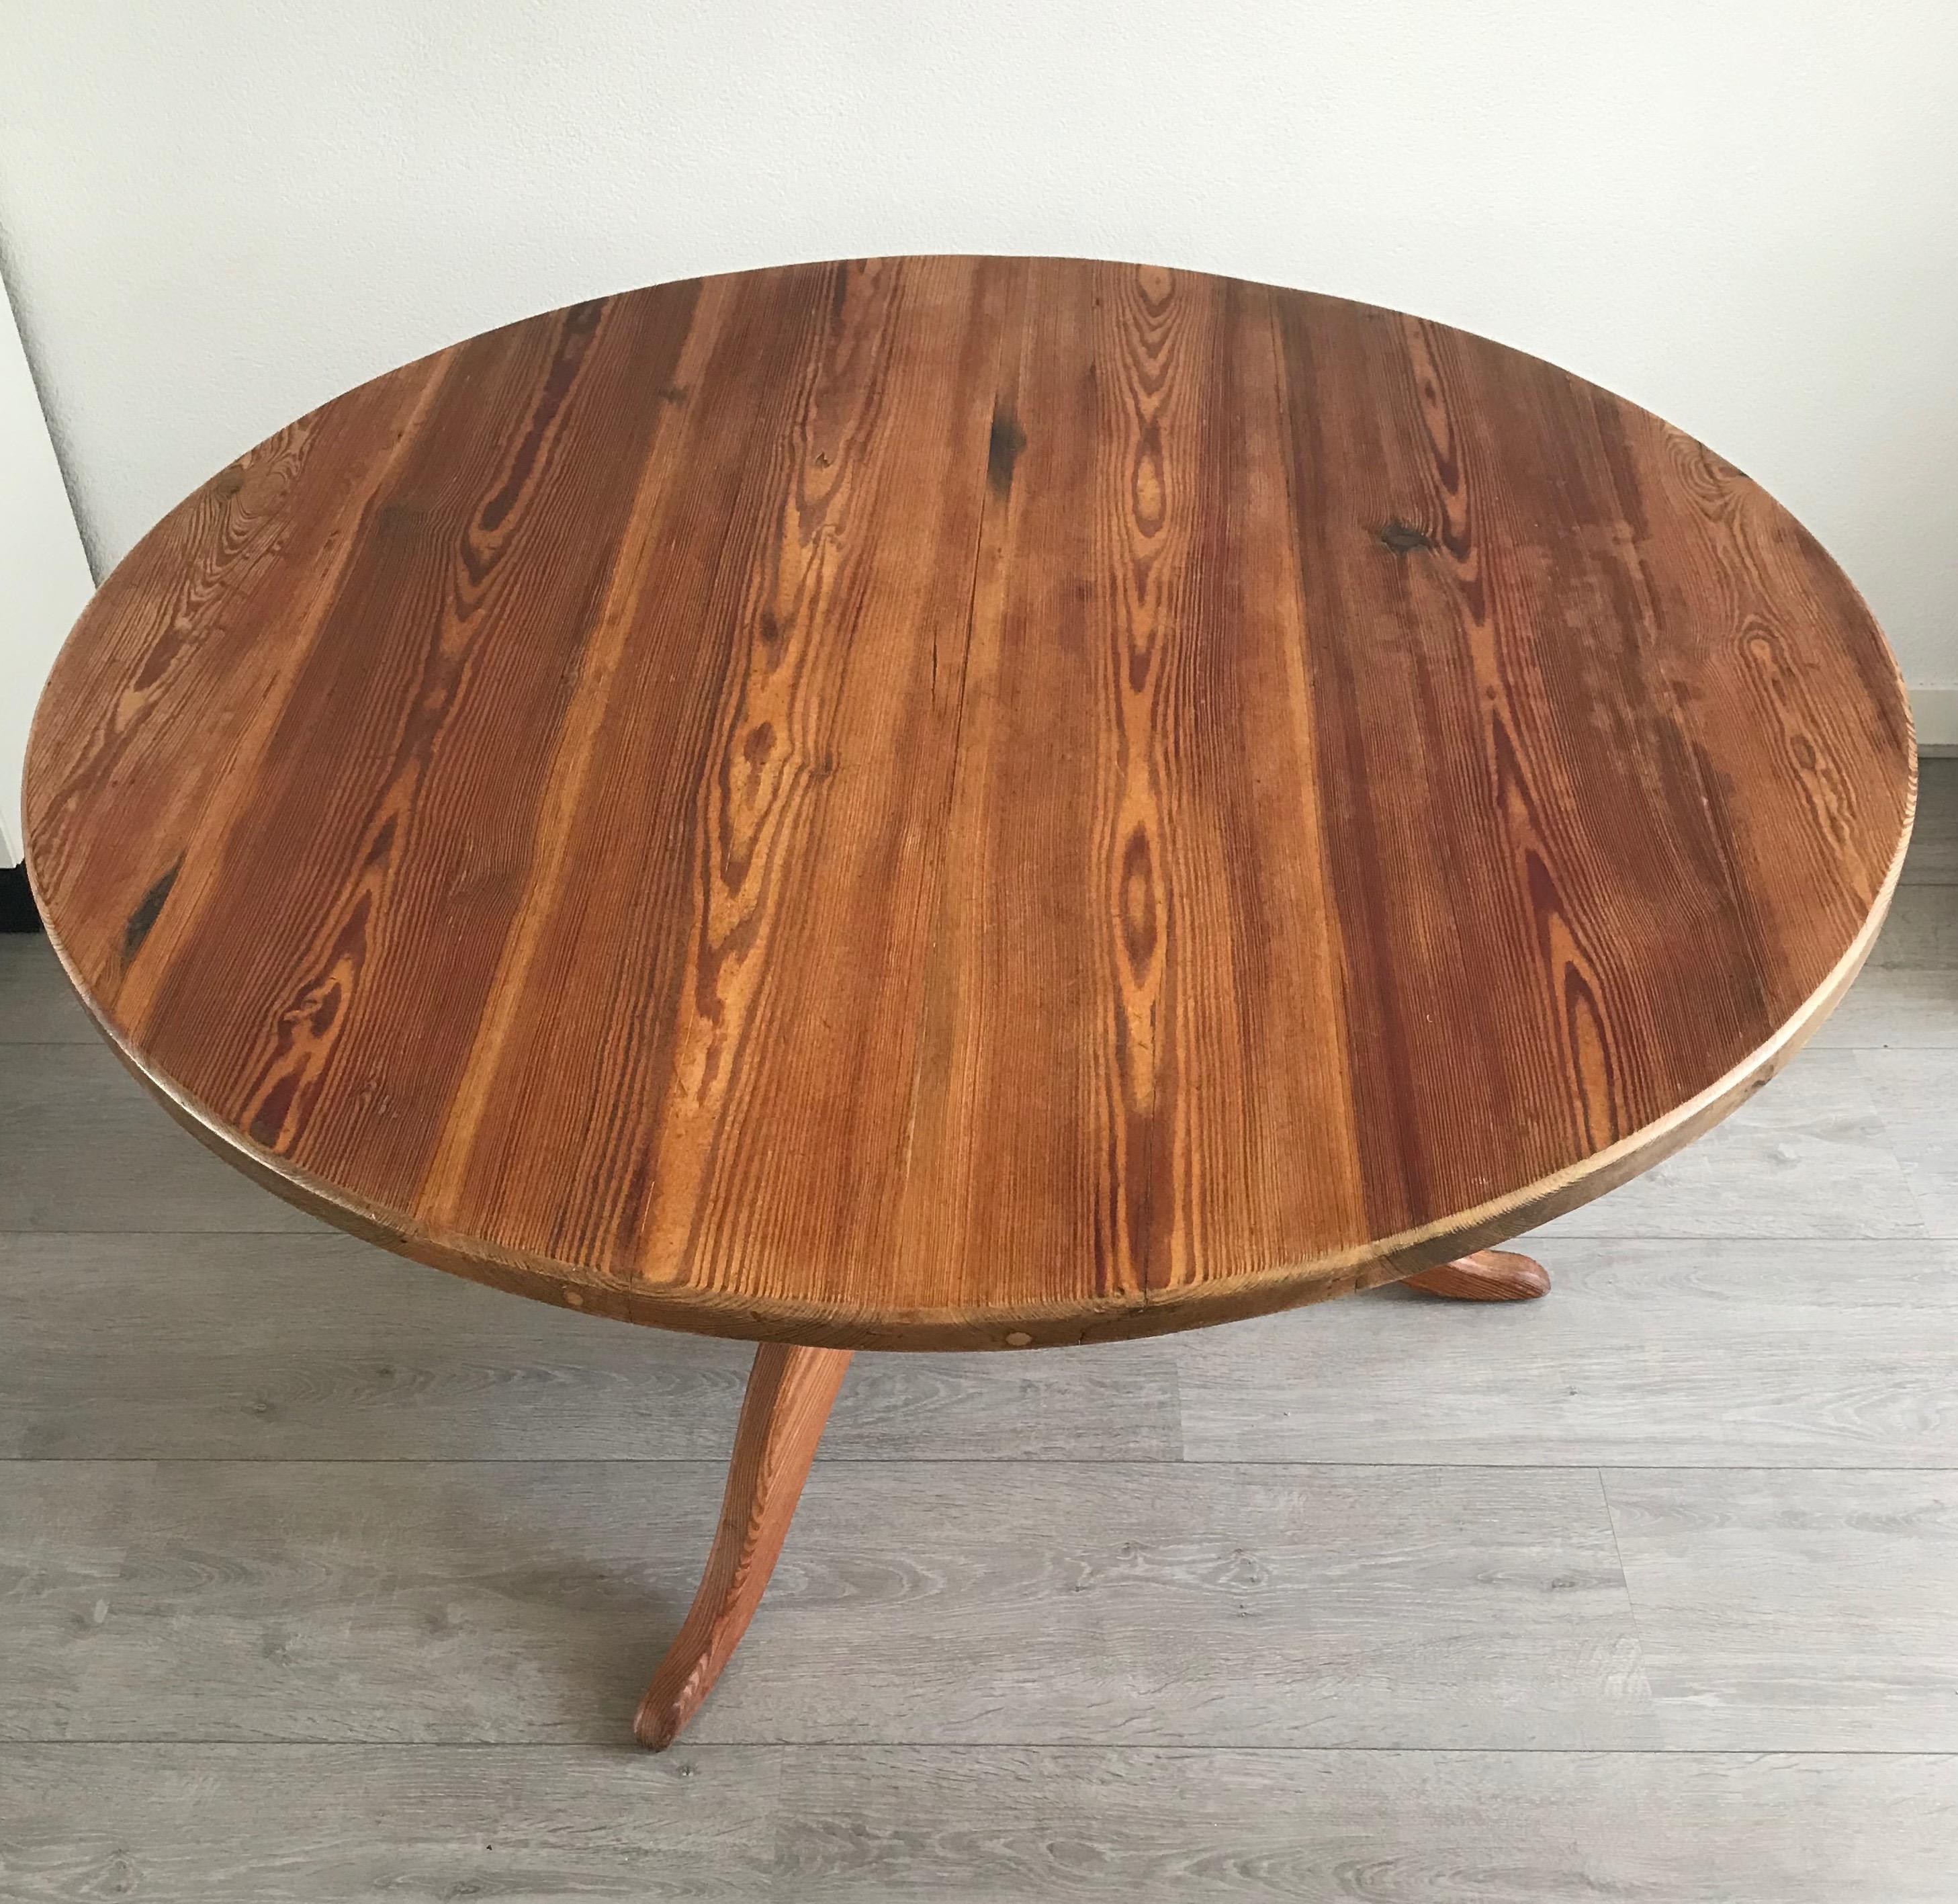 Hand-Crafted Large Antique Pitch Pine Round Farmhouse or Country Cottage Table